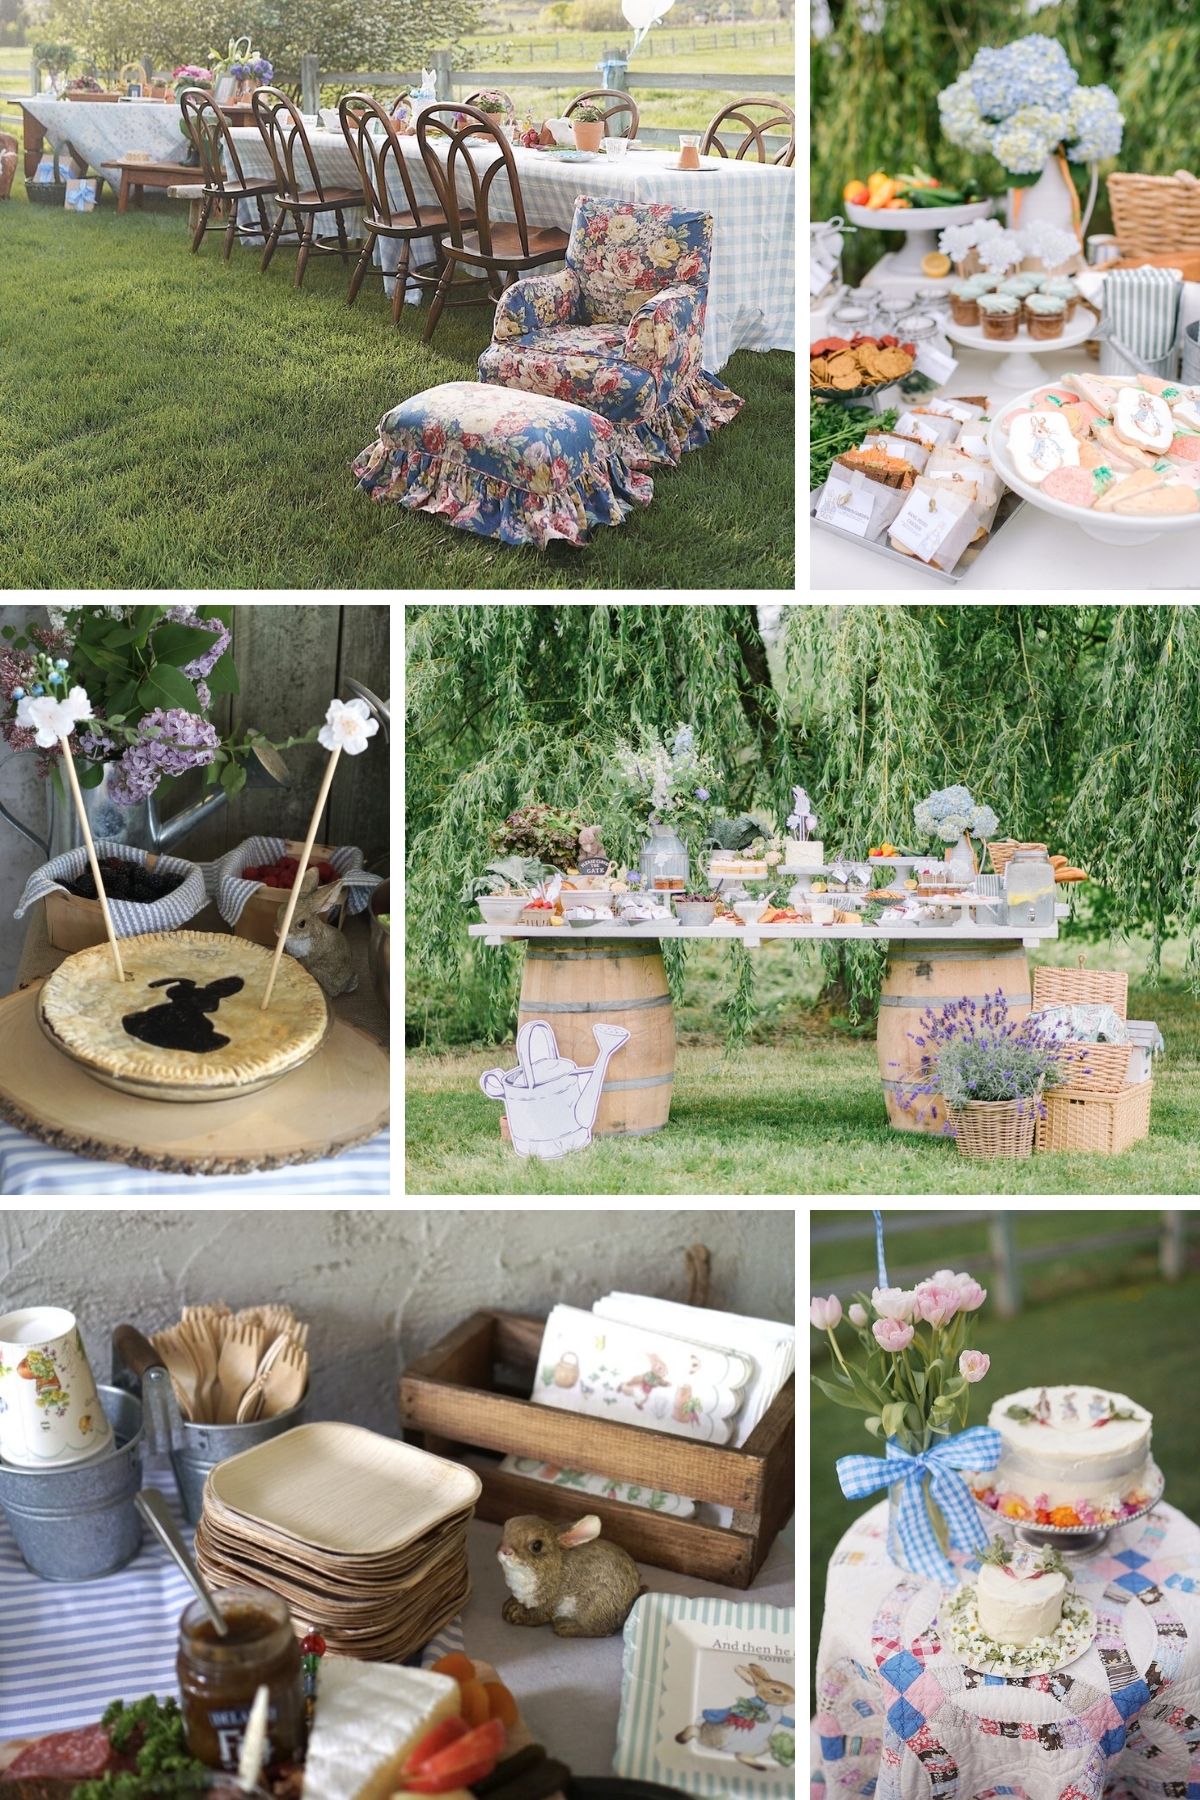 Photo collage for Peter Rabbit party theme including cakes, tablescapes, and party favors.